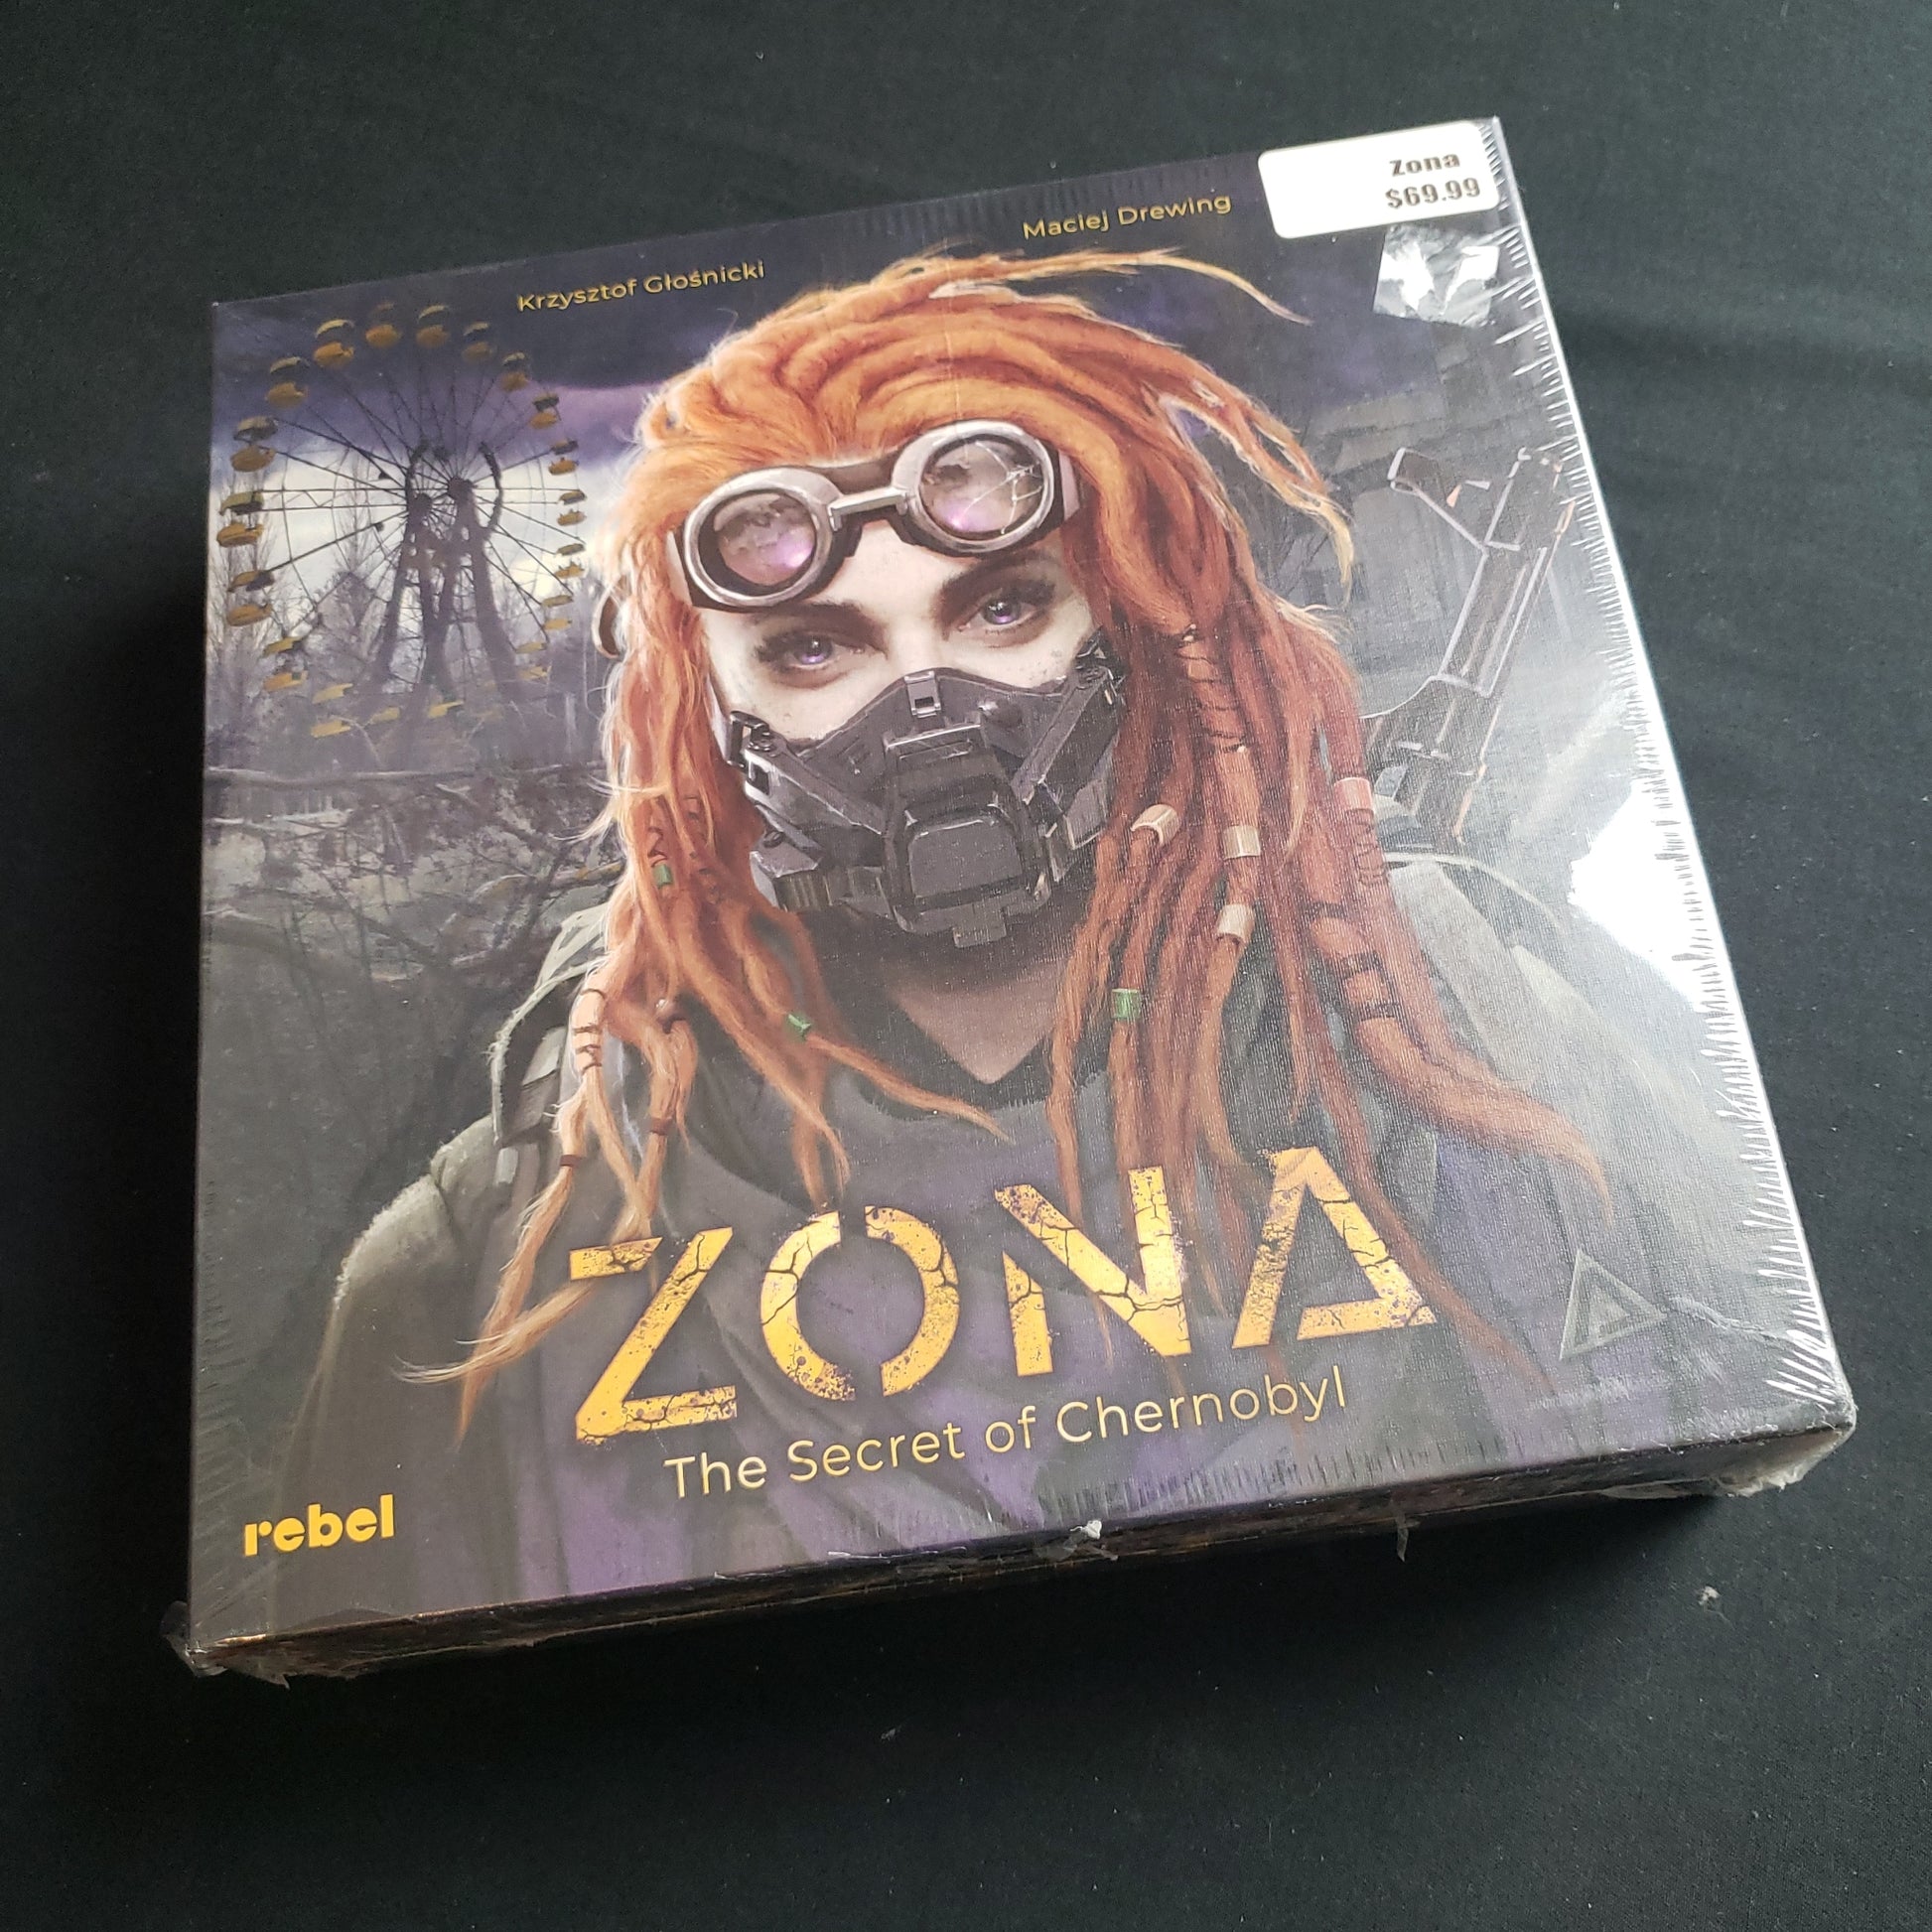 Image shows the front cover of the box of the Zona: Secret of Chernobyl board game